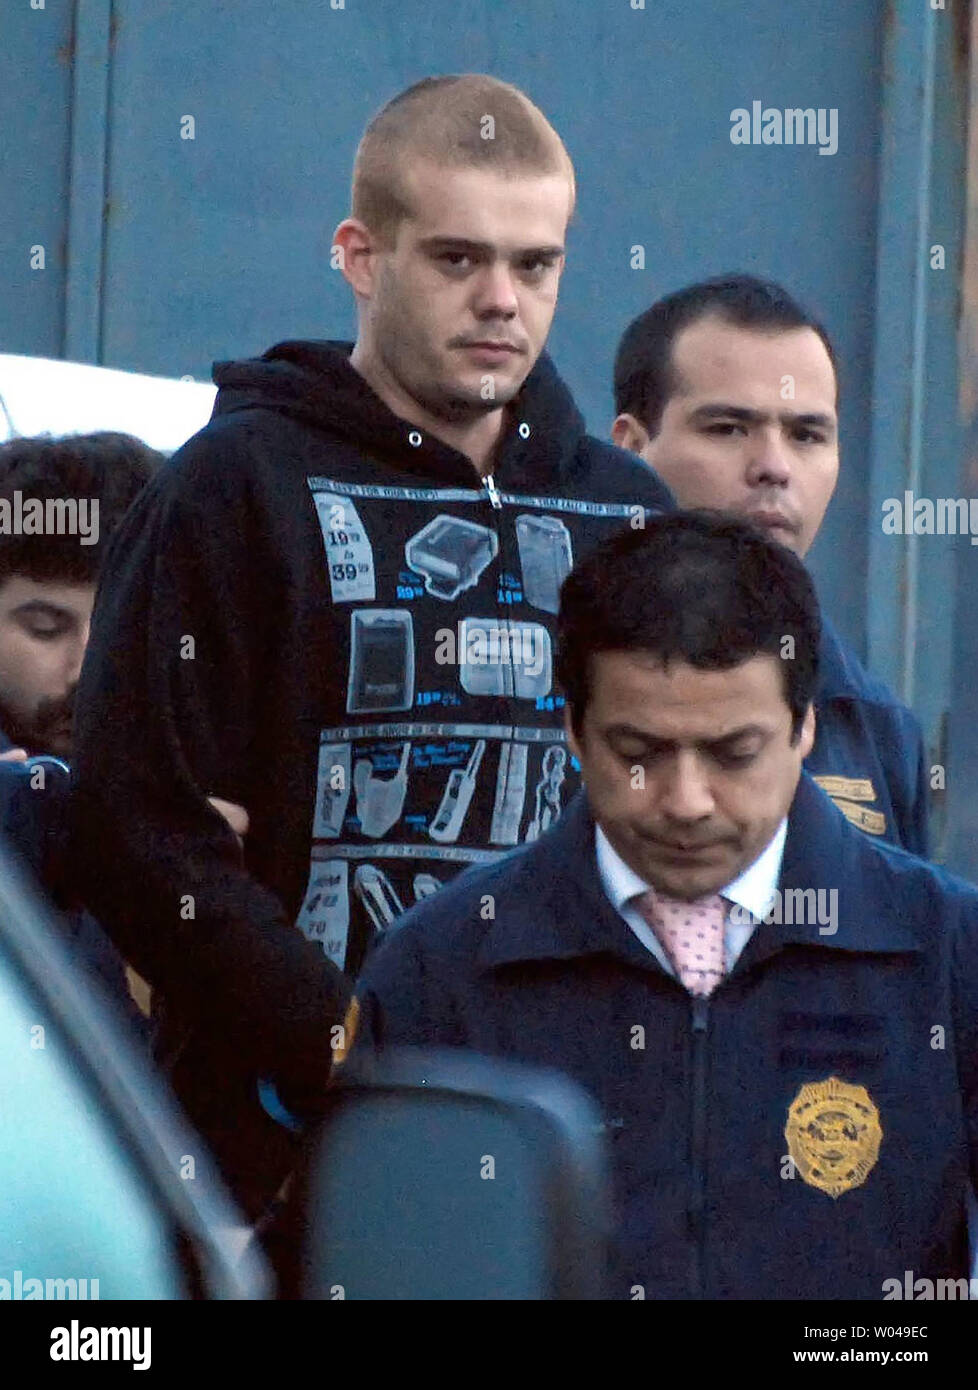 Dutch murder suspect Joran van der Sloot is escorted by Chilean police to an awaiting plane in Santiago, Chile, on June 4, 2010.  He was to be flown to northern Chile and then transferred overland to Peruvian authorities.  He is expected to be charged with the killing of 21-year-old Stephany Flores in a Lima, Peru hotel room. The 23-year-old van der Sloot, a citizen of the Netherlands, remains the prime suspect in the disappearance of Natalie Holloway, and Alabama teenager, on the island of Aruba in 2005.   UPI/Dinko Eichin Stock Photo